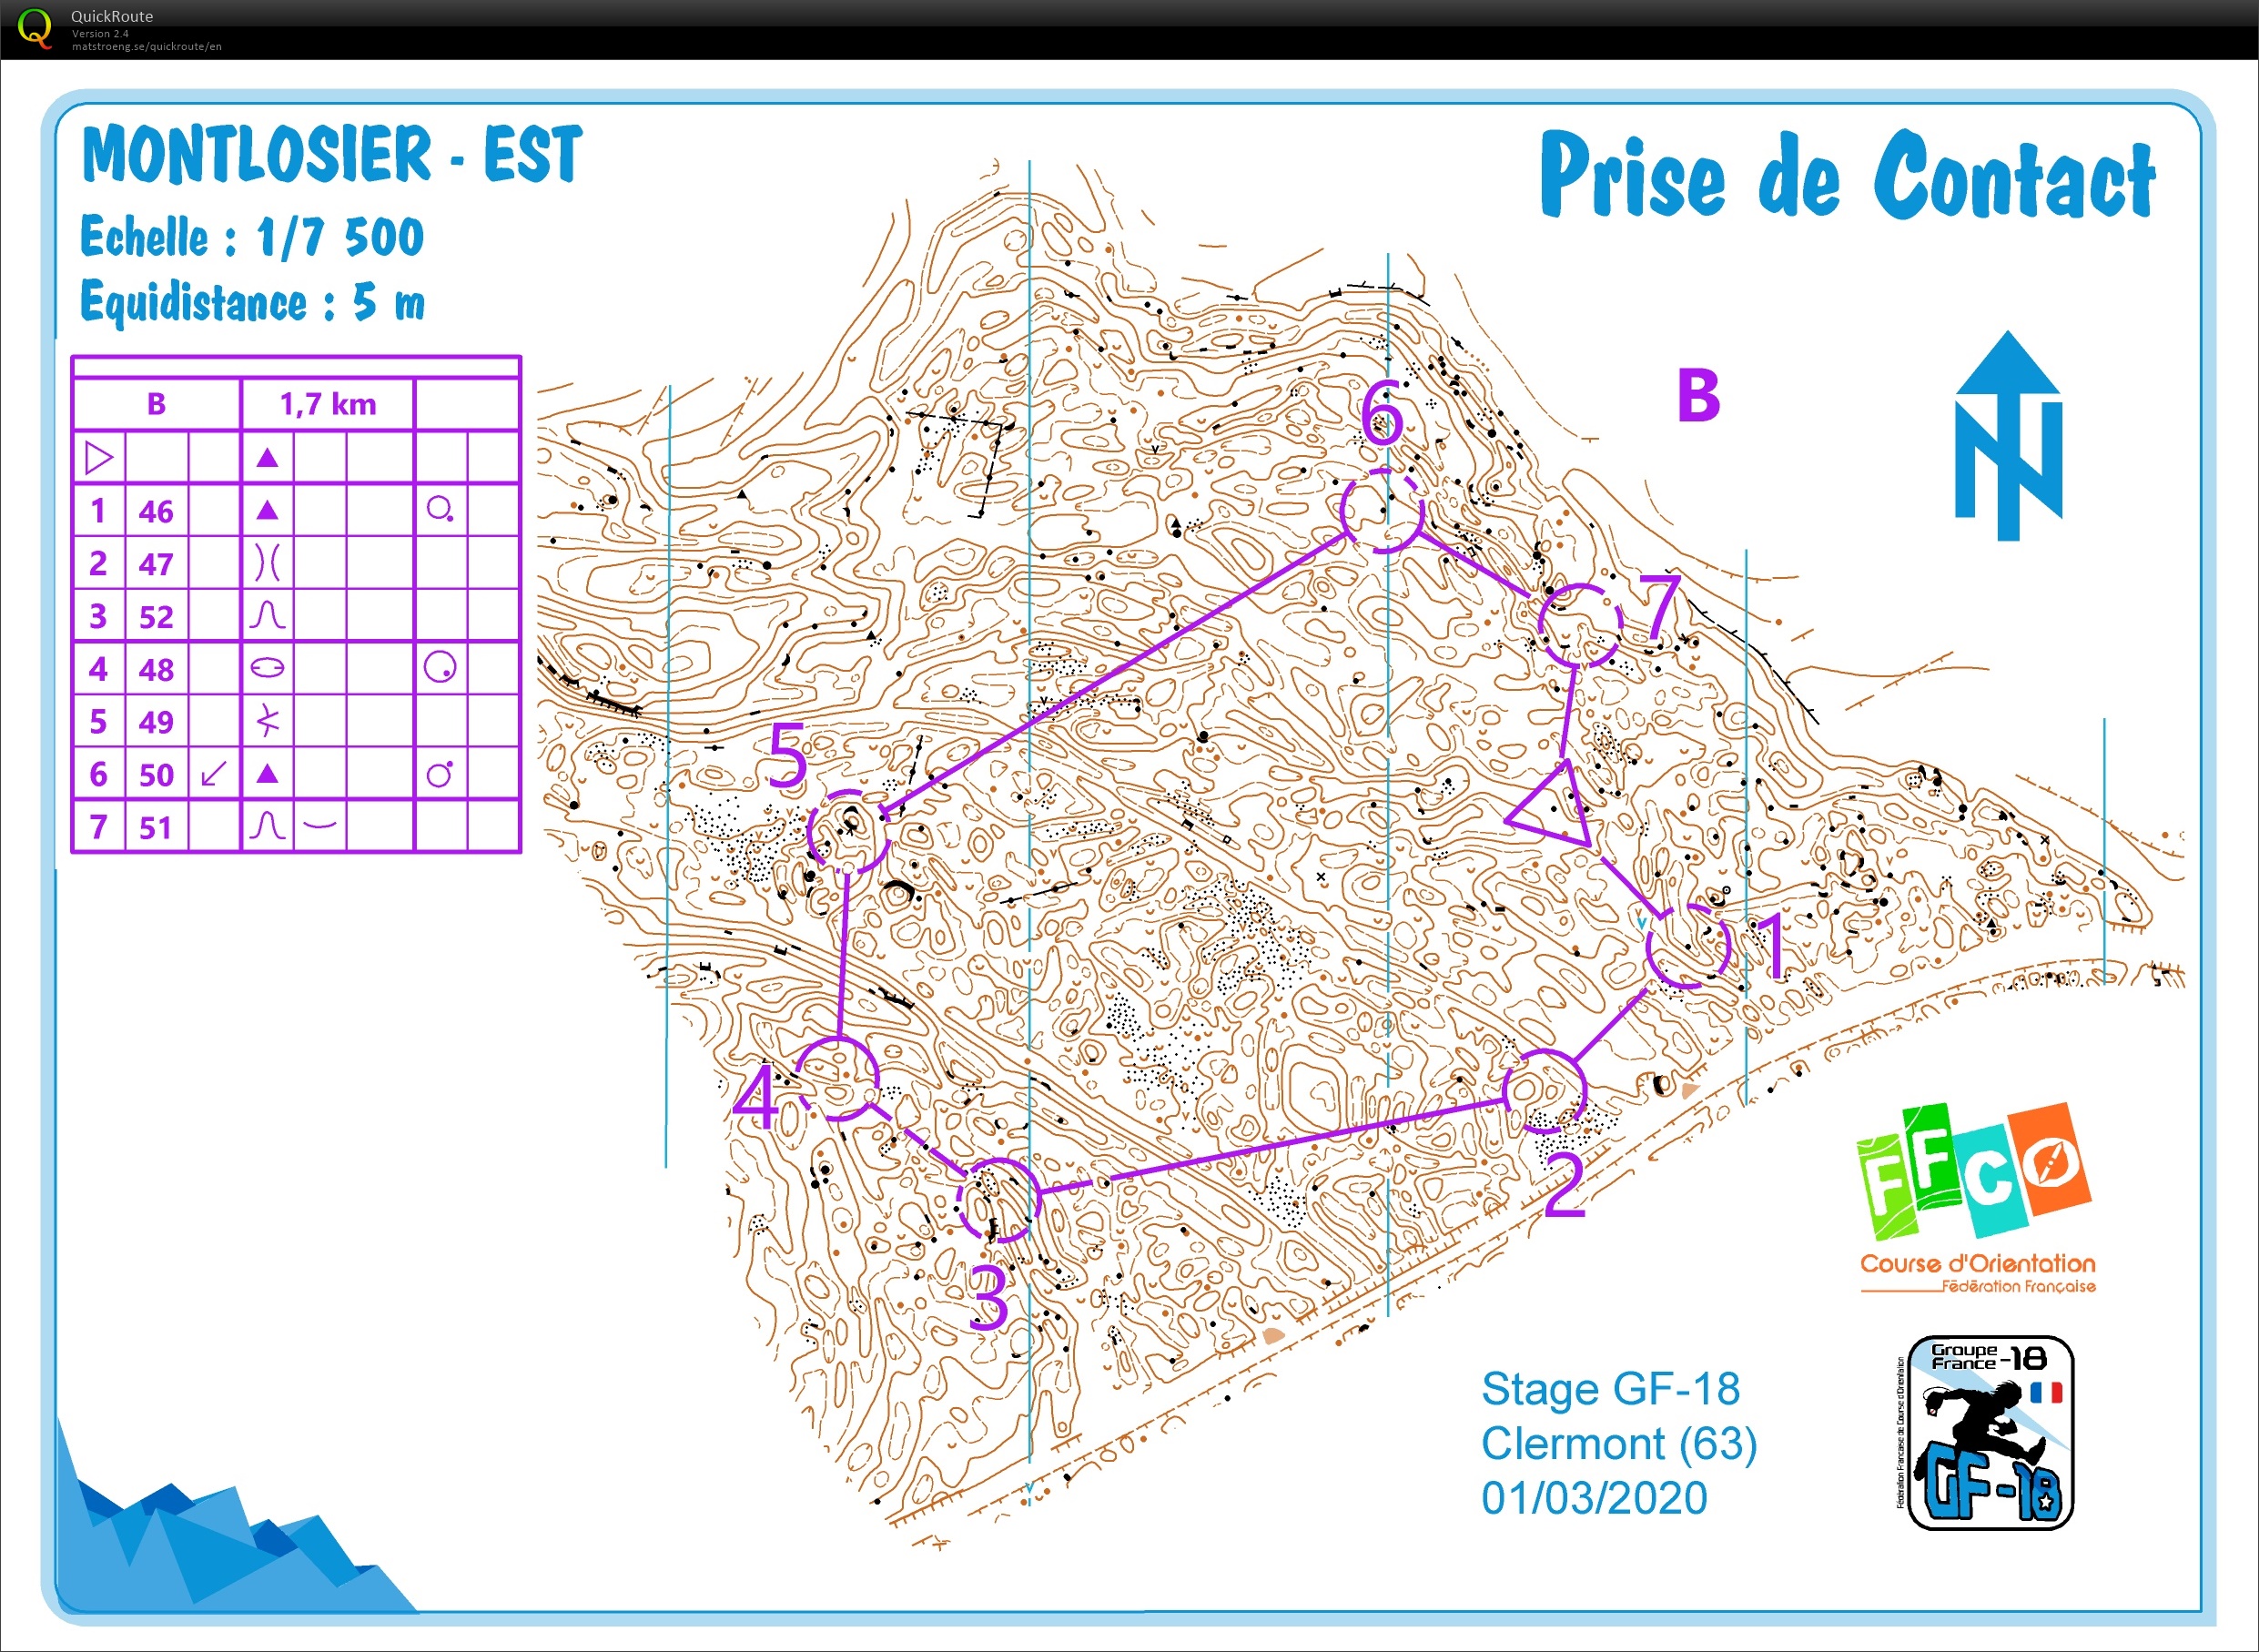 Stage gf-18 Clermont (2) relief B (2020-03-02)